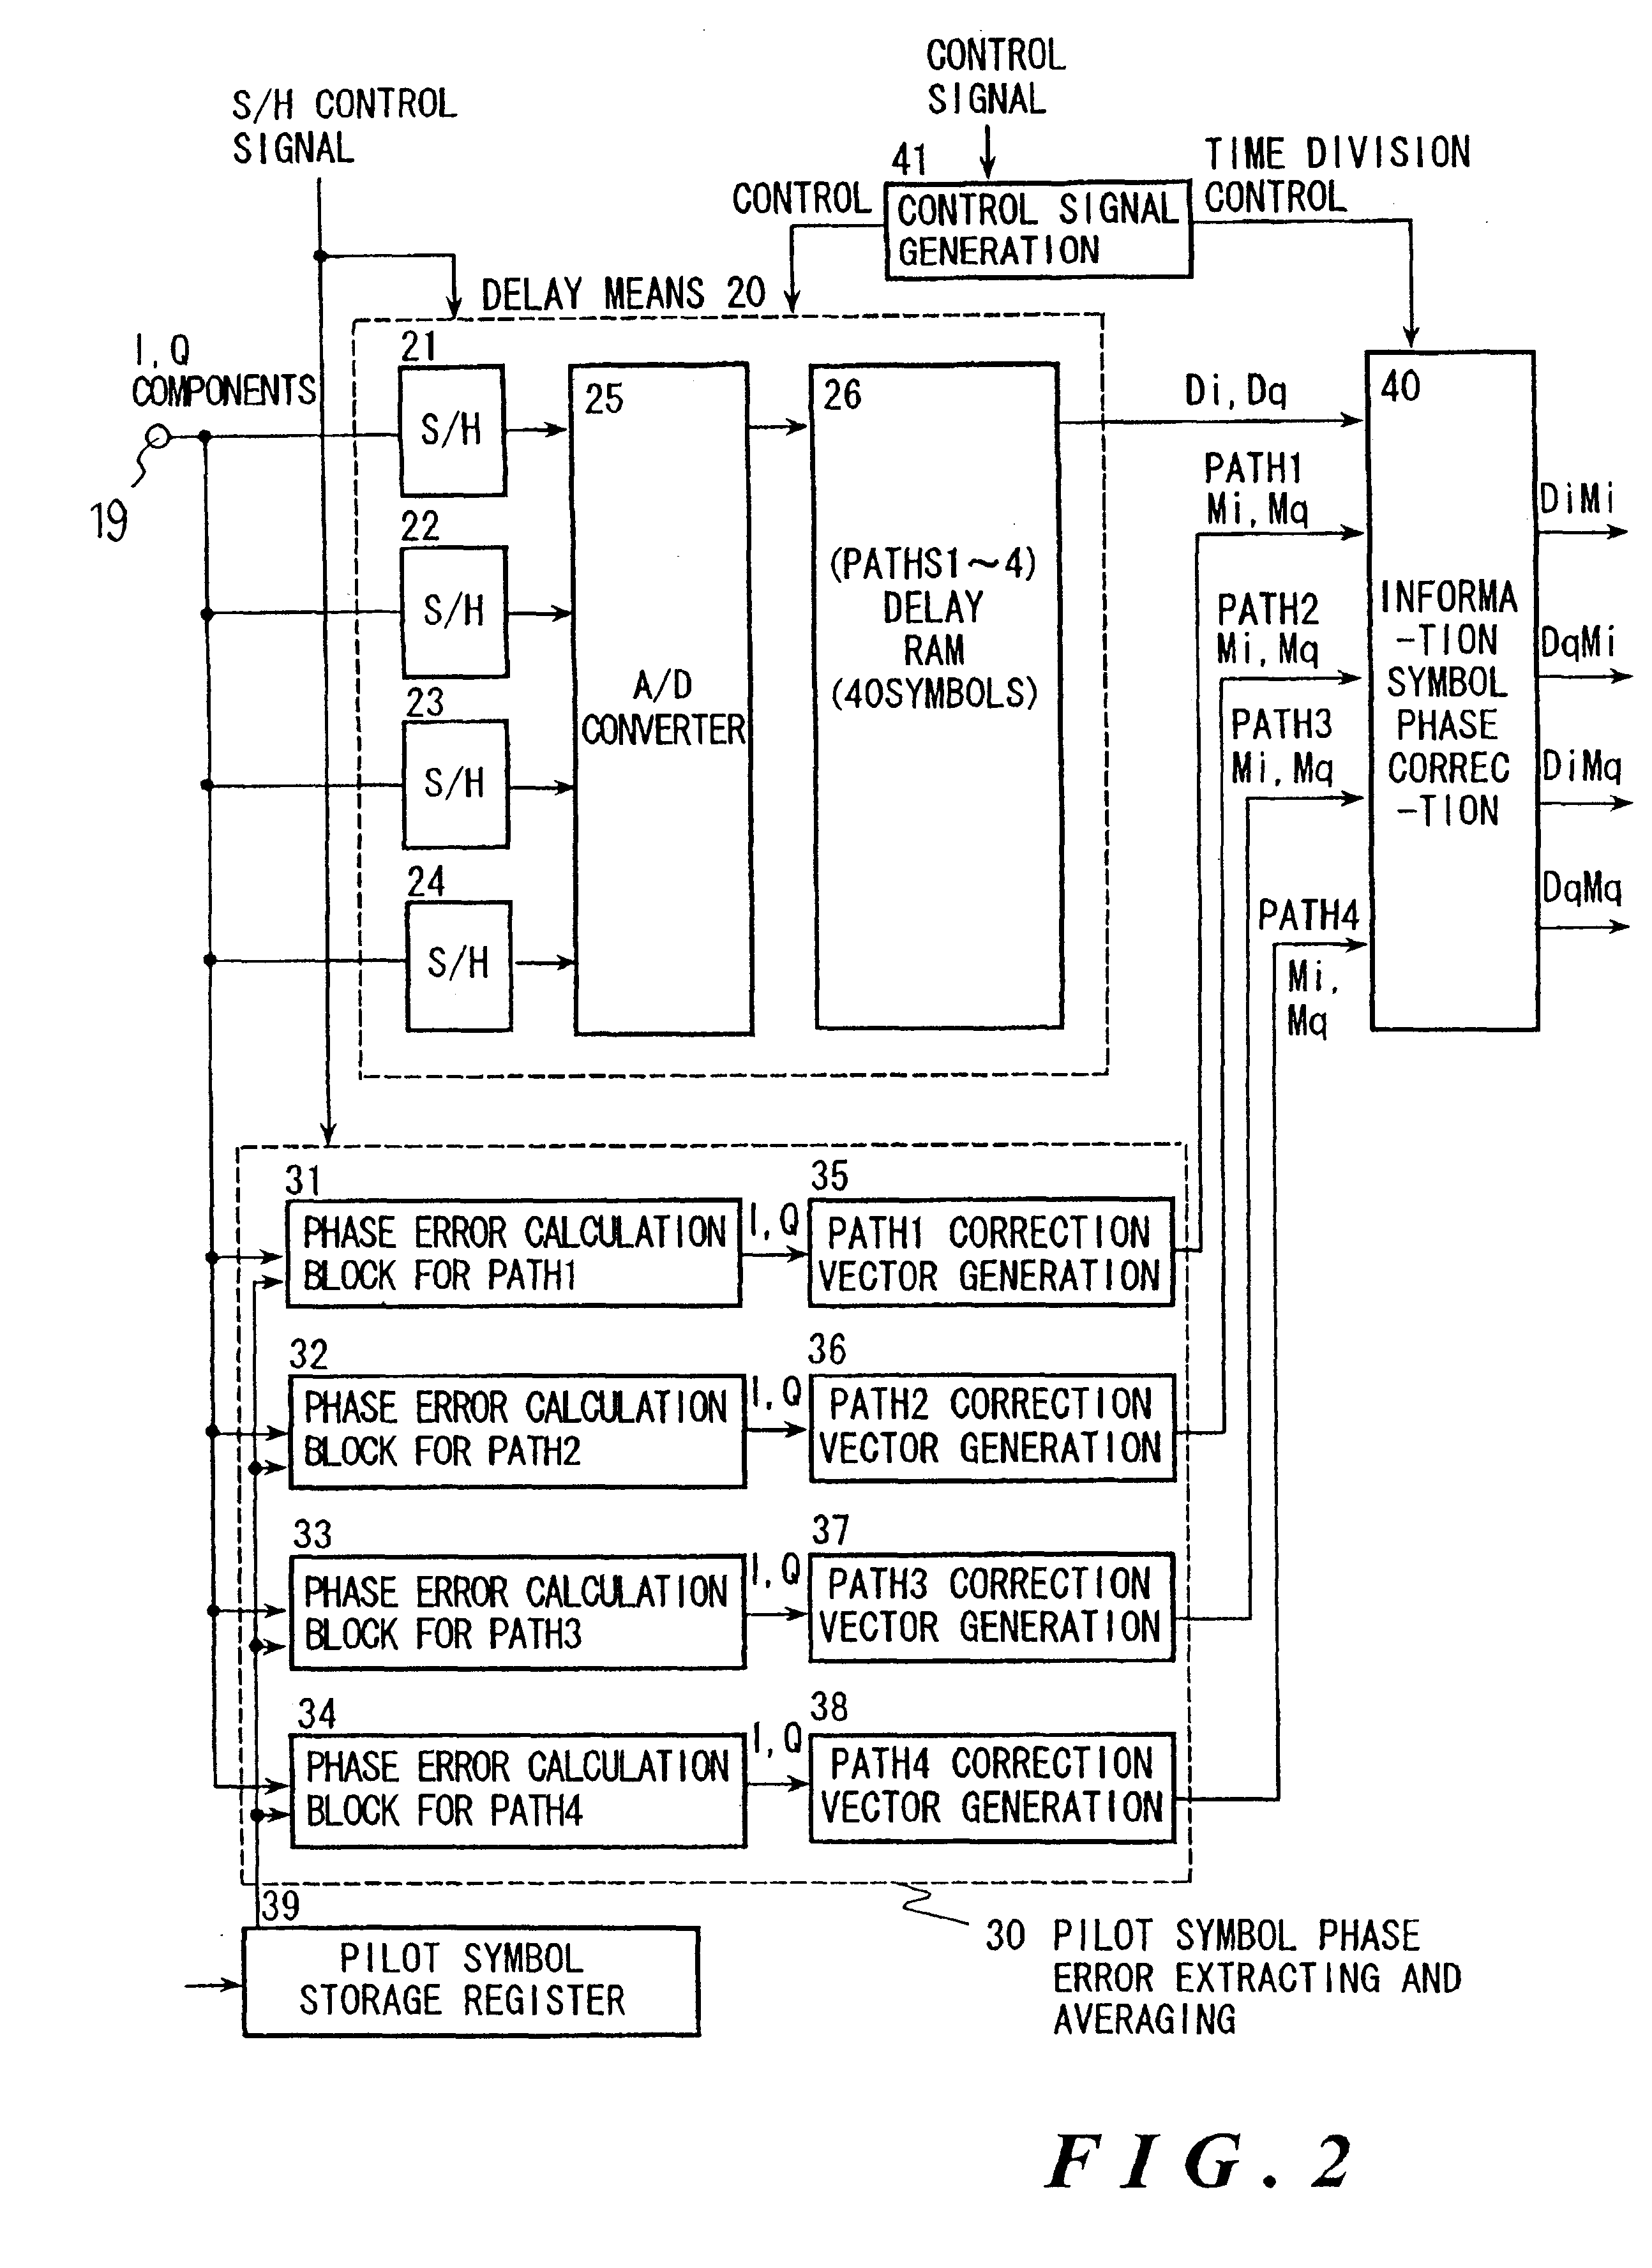 Receiver in a spread spectrum communication system having low power analog multipliers and adders